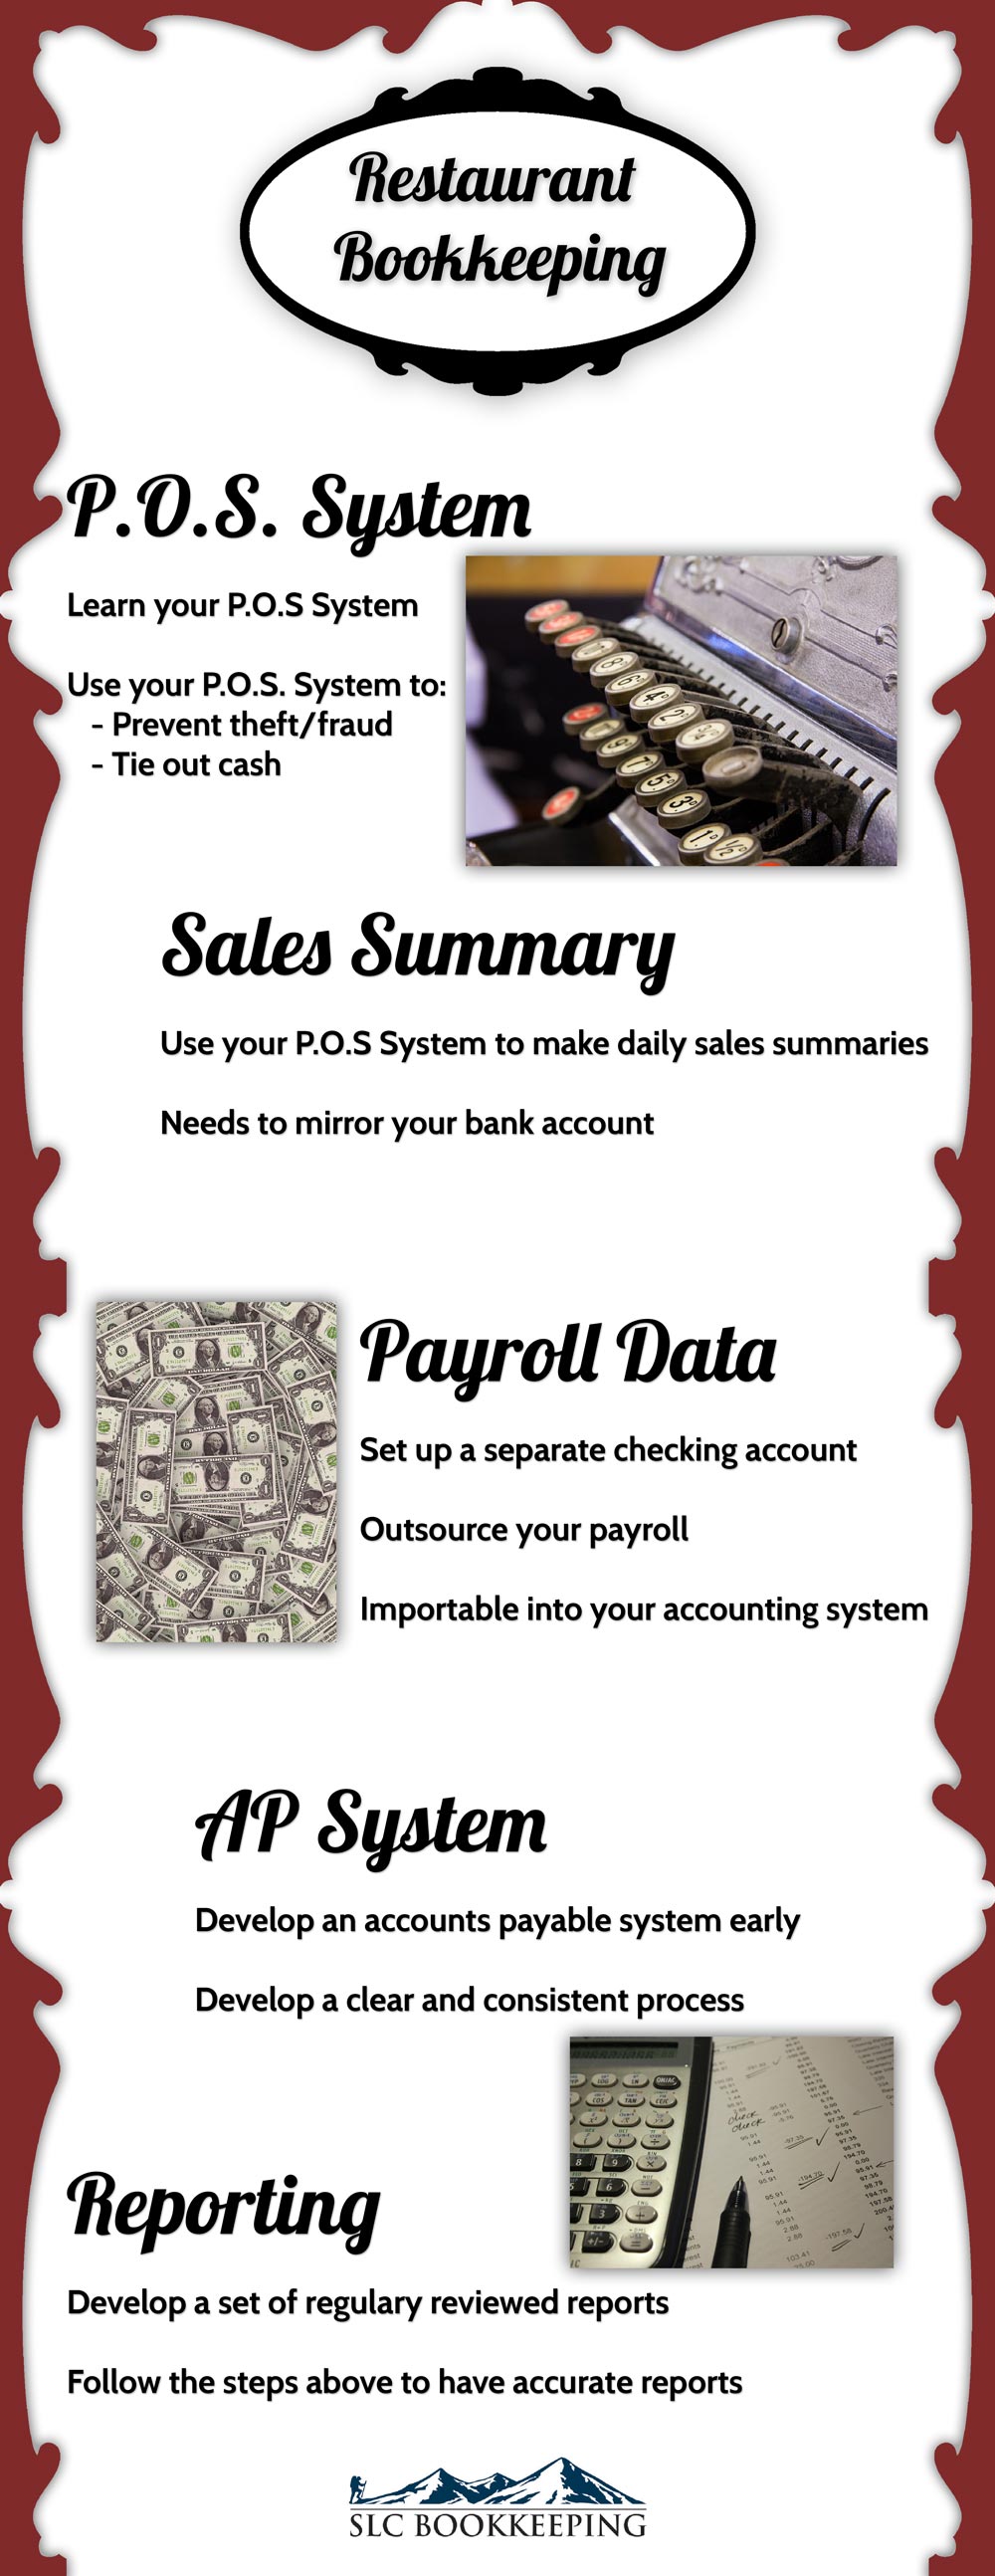 How to Develop a Dialed System for Your Restaurant Bookkeeping